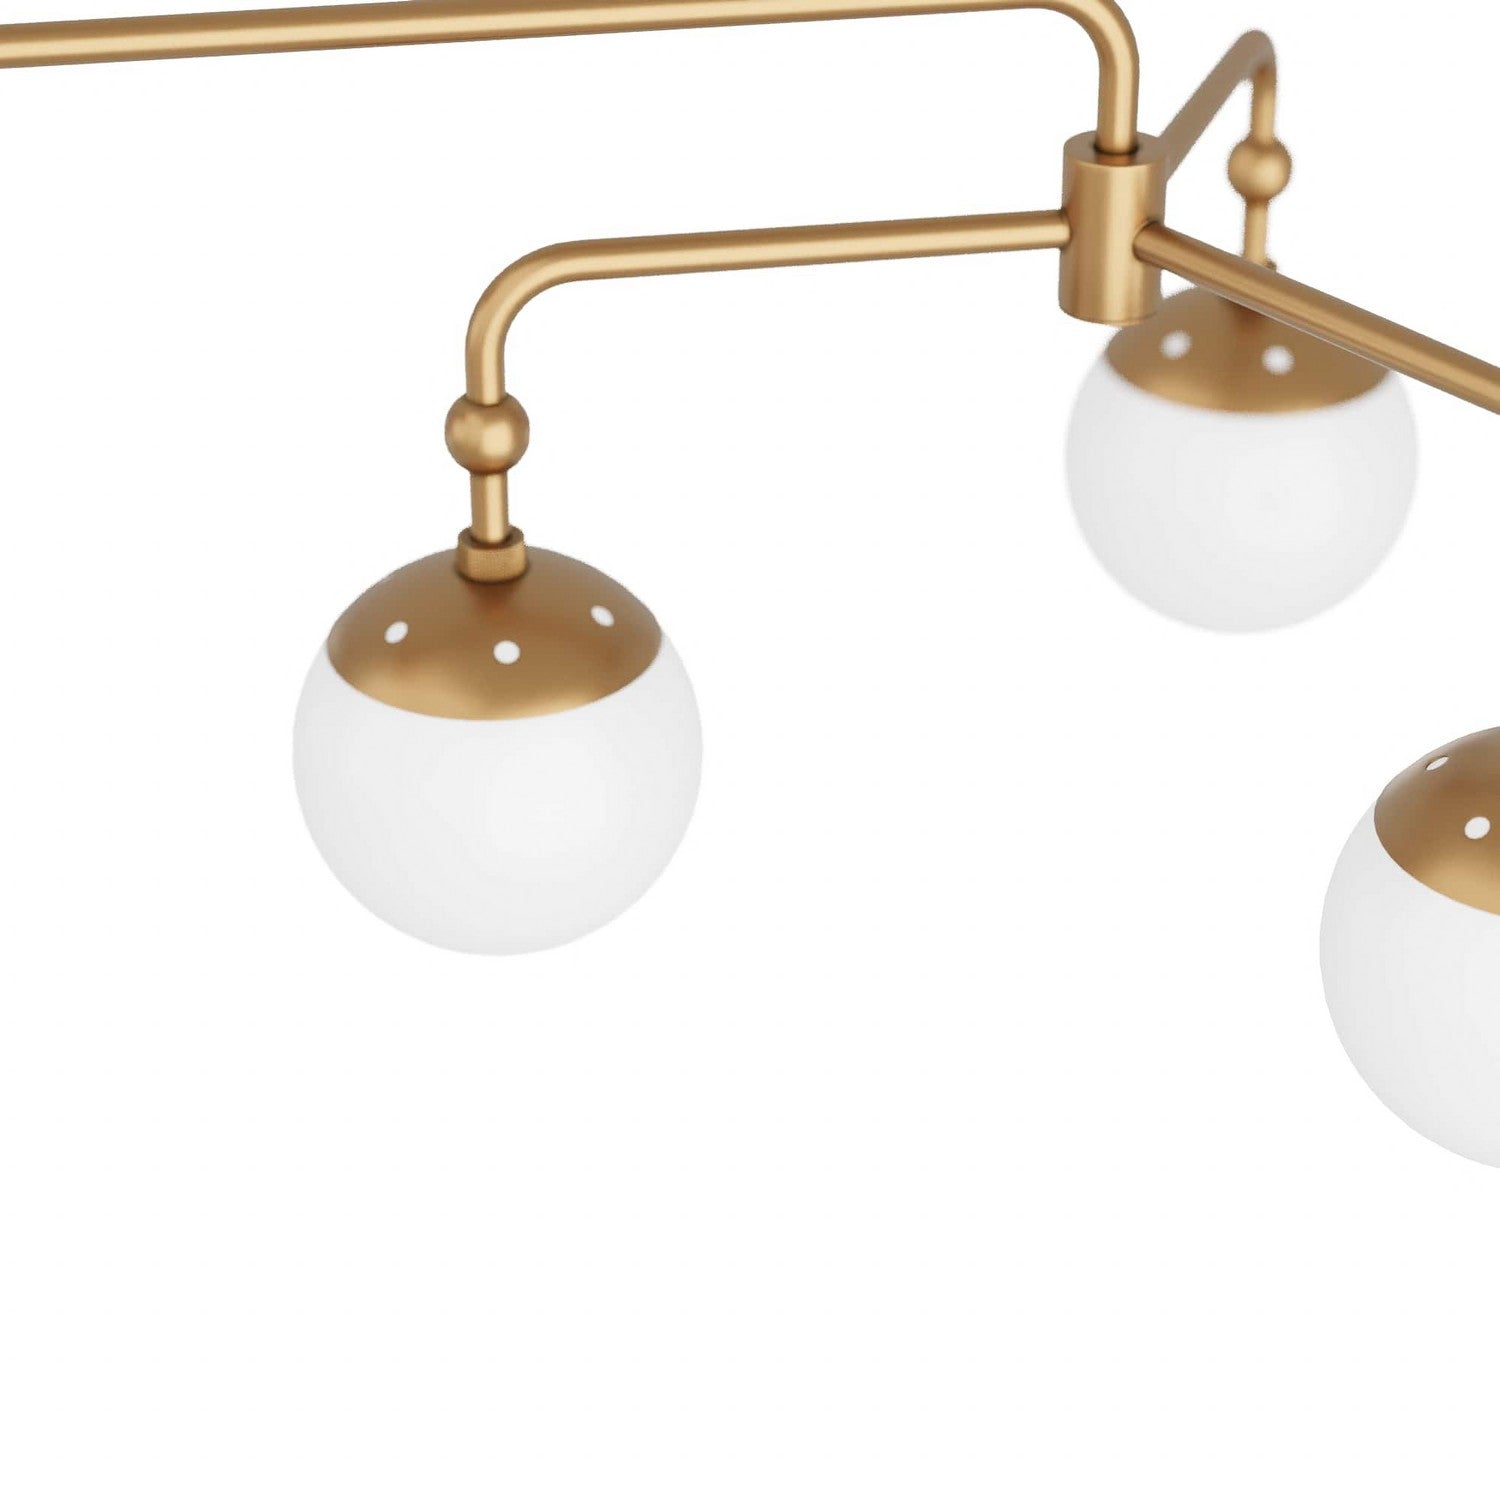 Nine Light Chandelier from the Utica collection in Antique Brass finish